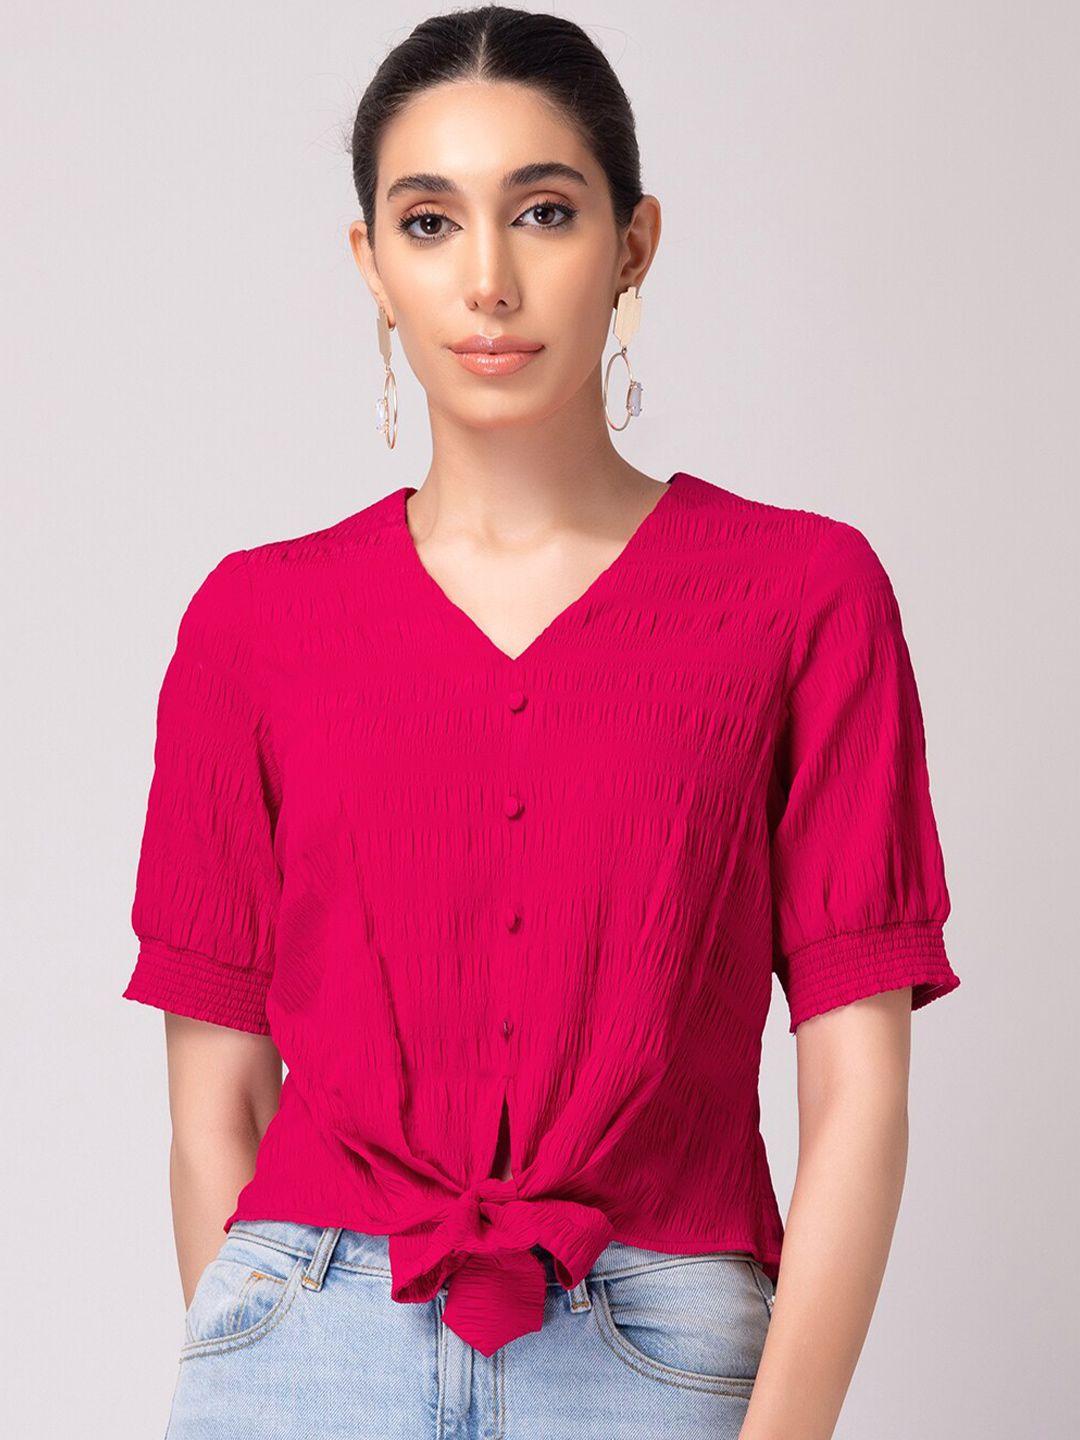 faballey v-neck front tie up top